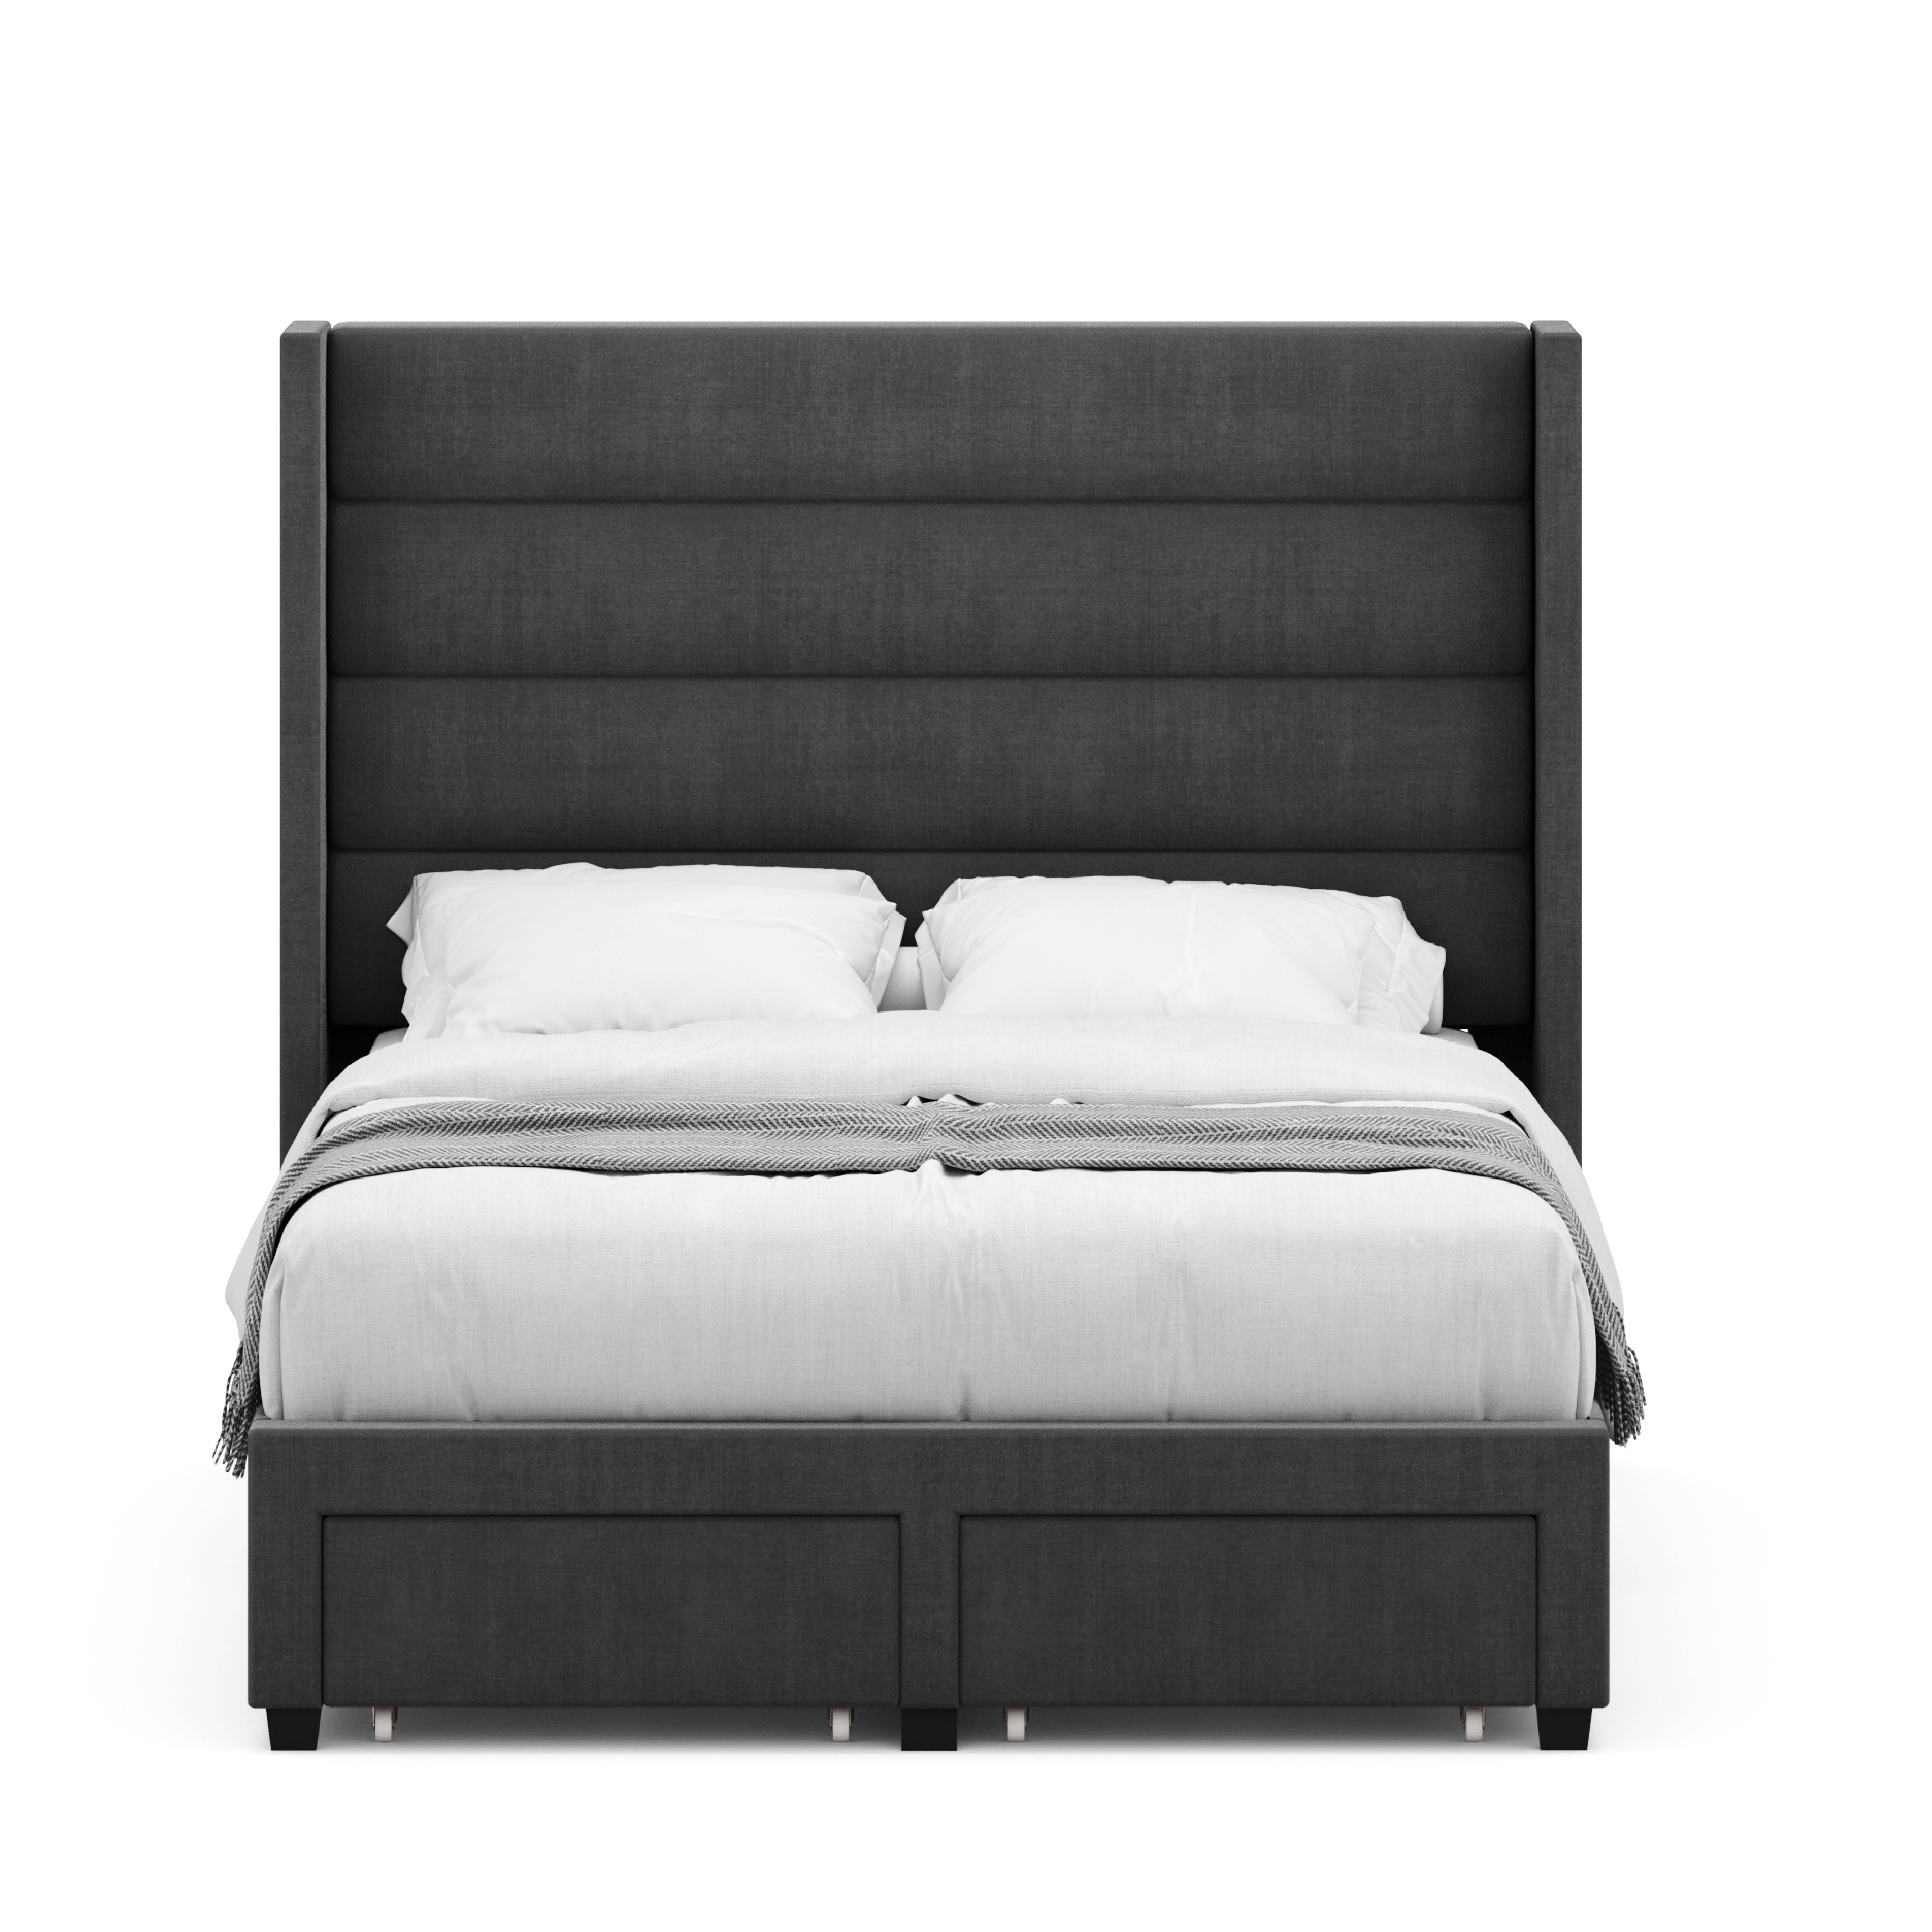 DG Casa George Modern Queen Size Bed Frame - Wooden Platform Bed Frame With Tall Tufted Horizontal Channel Wingback Headboard - Box Spring Needed - Upholstered Panel Bed Frame With Storage - Charcoal - image 2 of 9